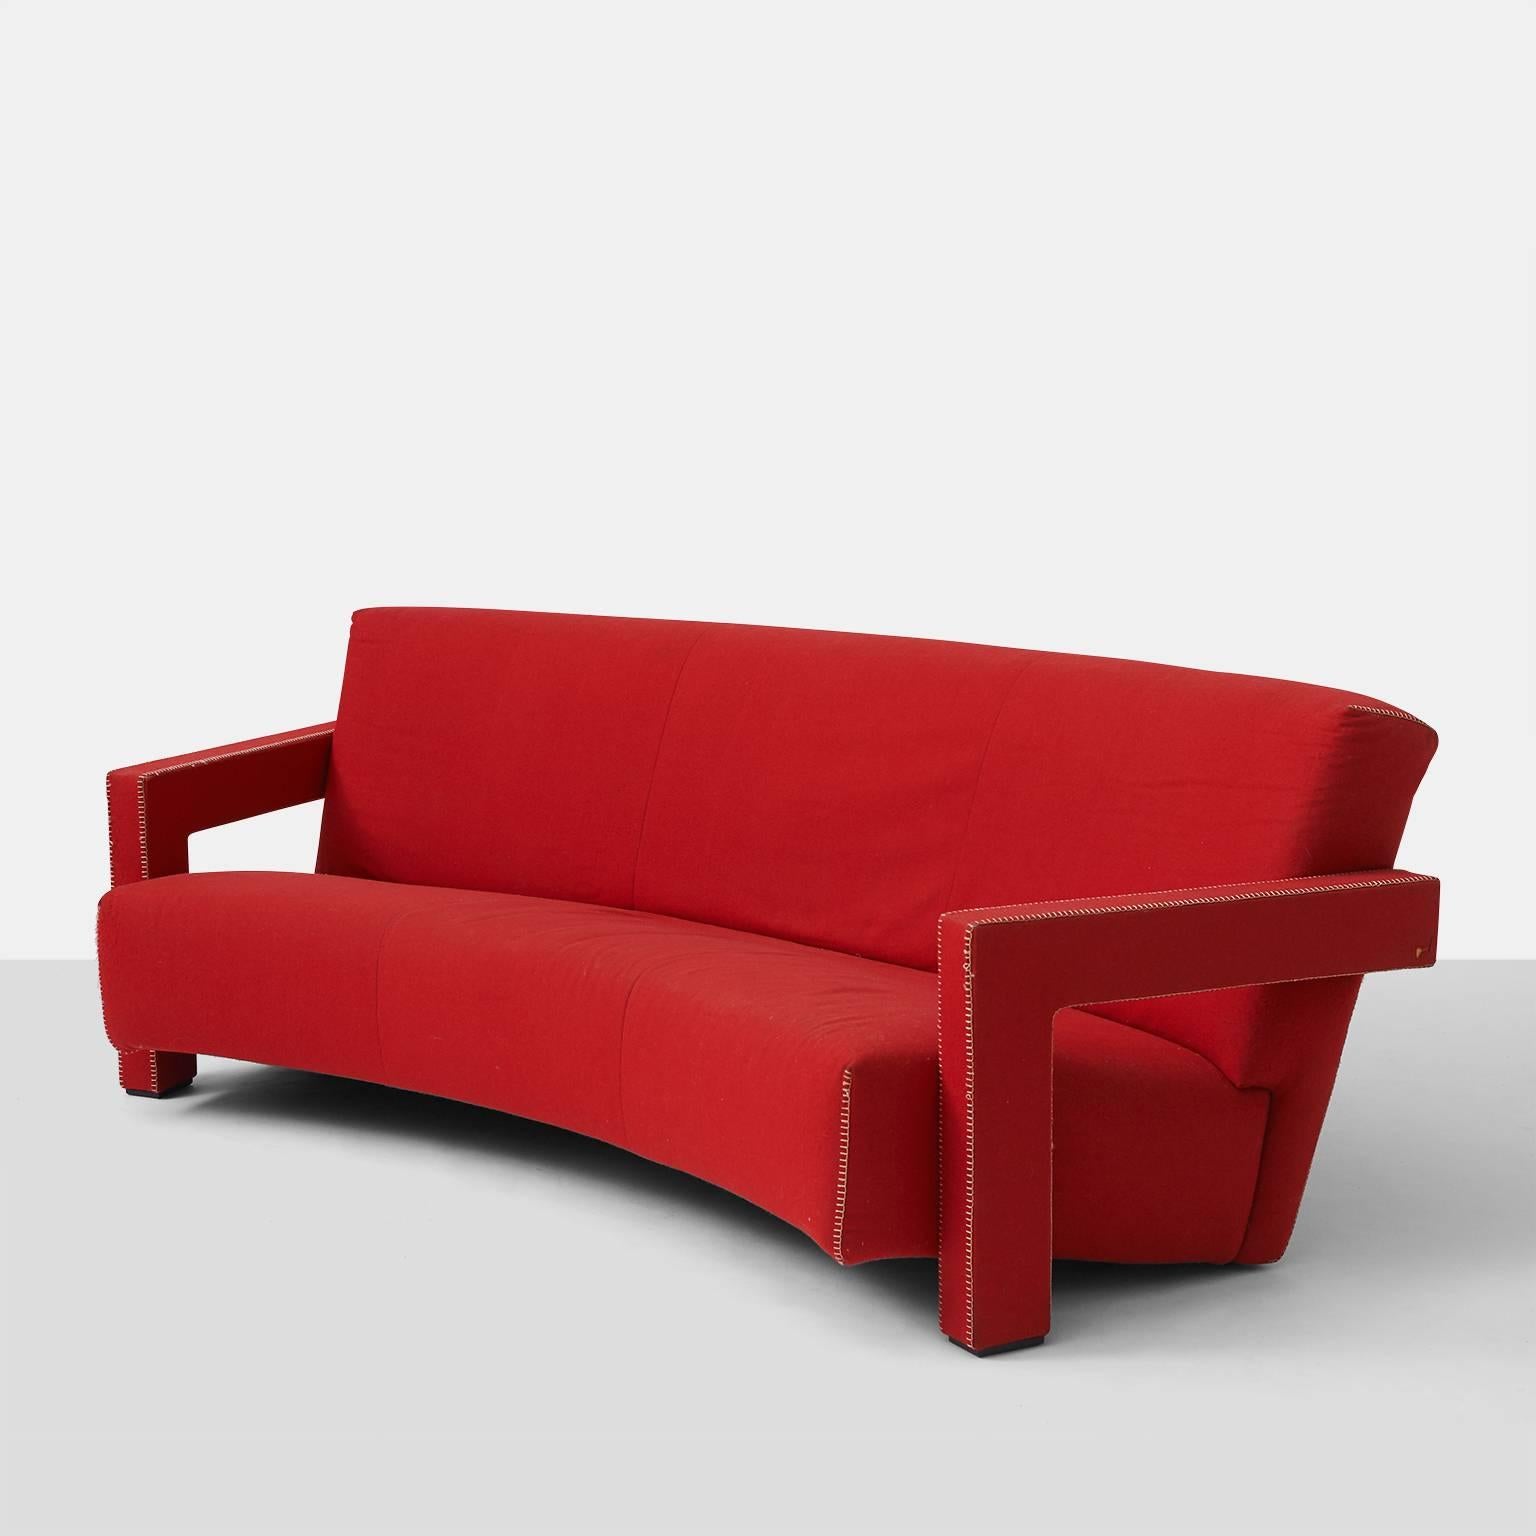 A very early edition of Gerrit Rietveld's Utrecht sofa designed in 1935 and made by Cassina in the late 1960s. This curved back sofa retains the original red wool flannel fabric with ivory hemstitch trim. Original label and signature are intact.